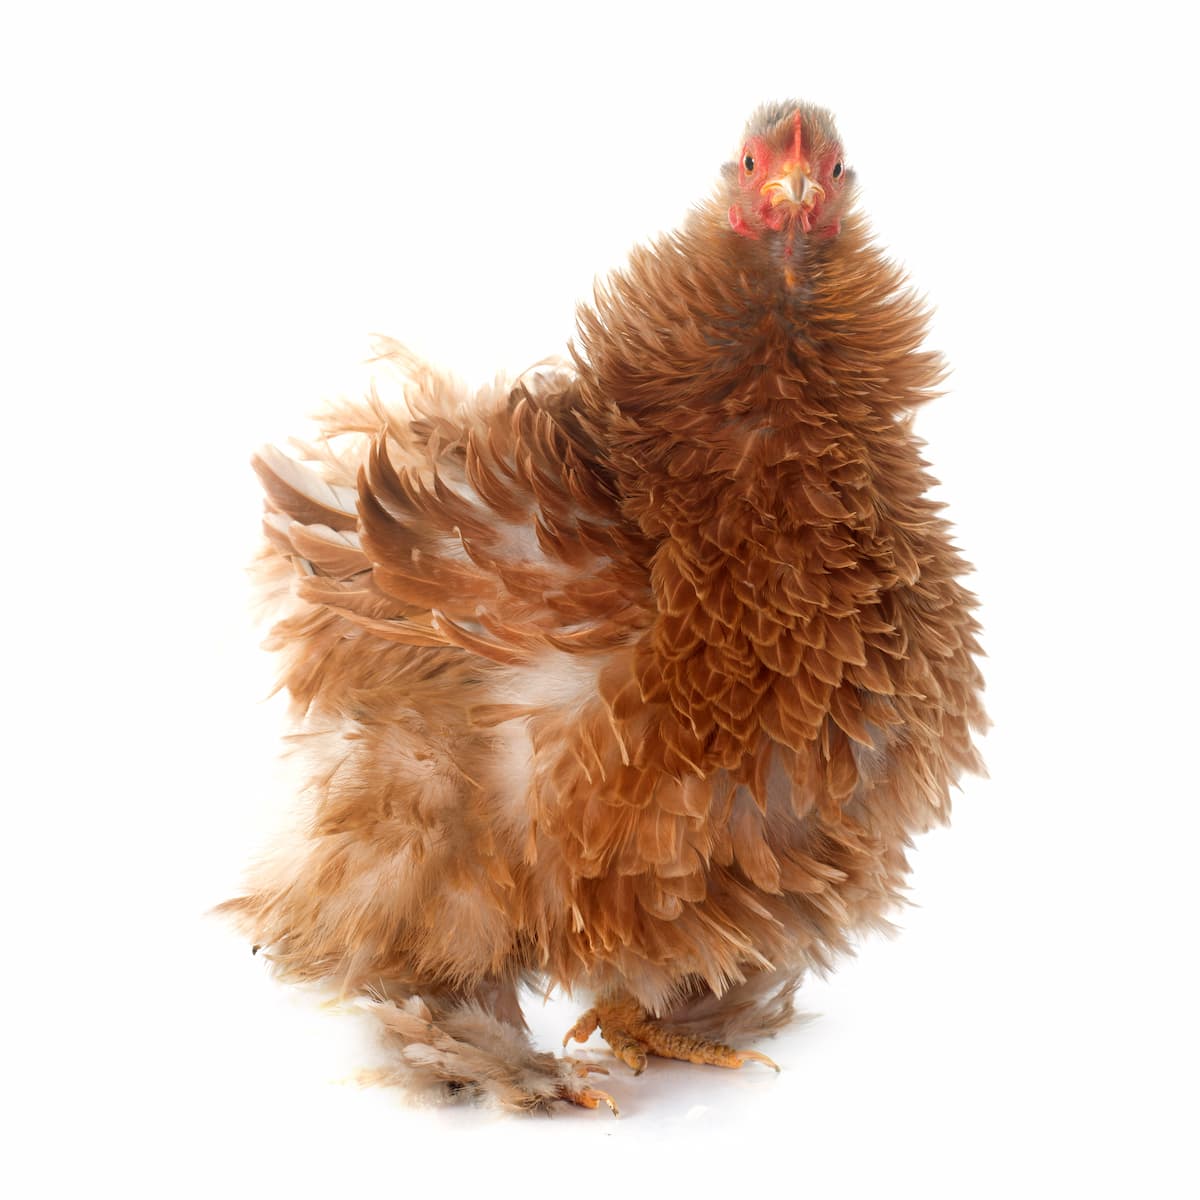 Guide to Frizzle Chicken Breed